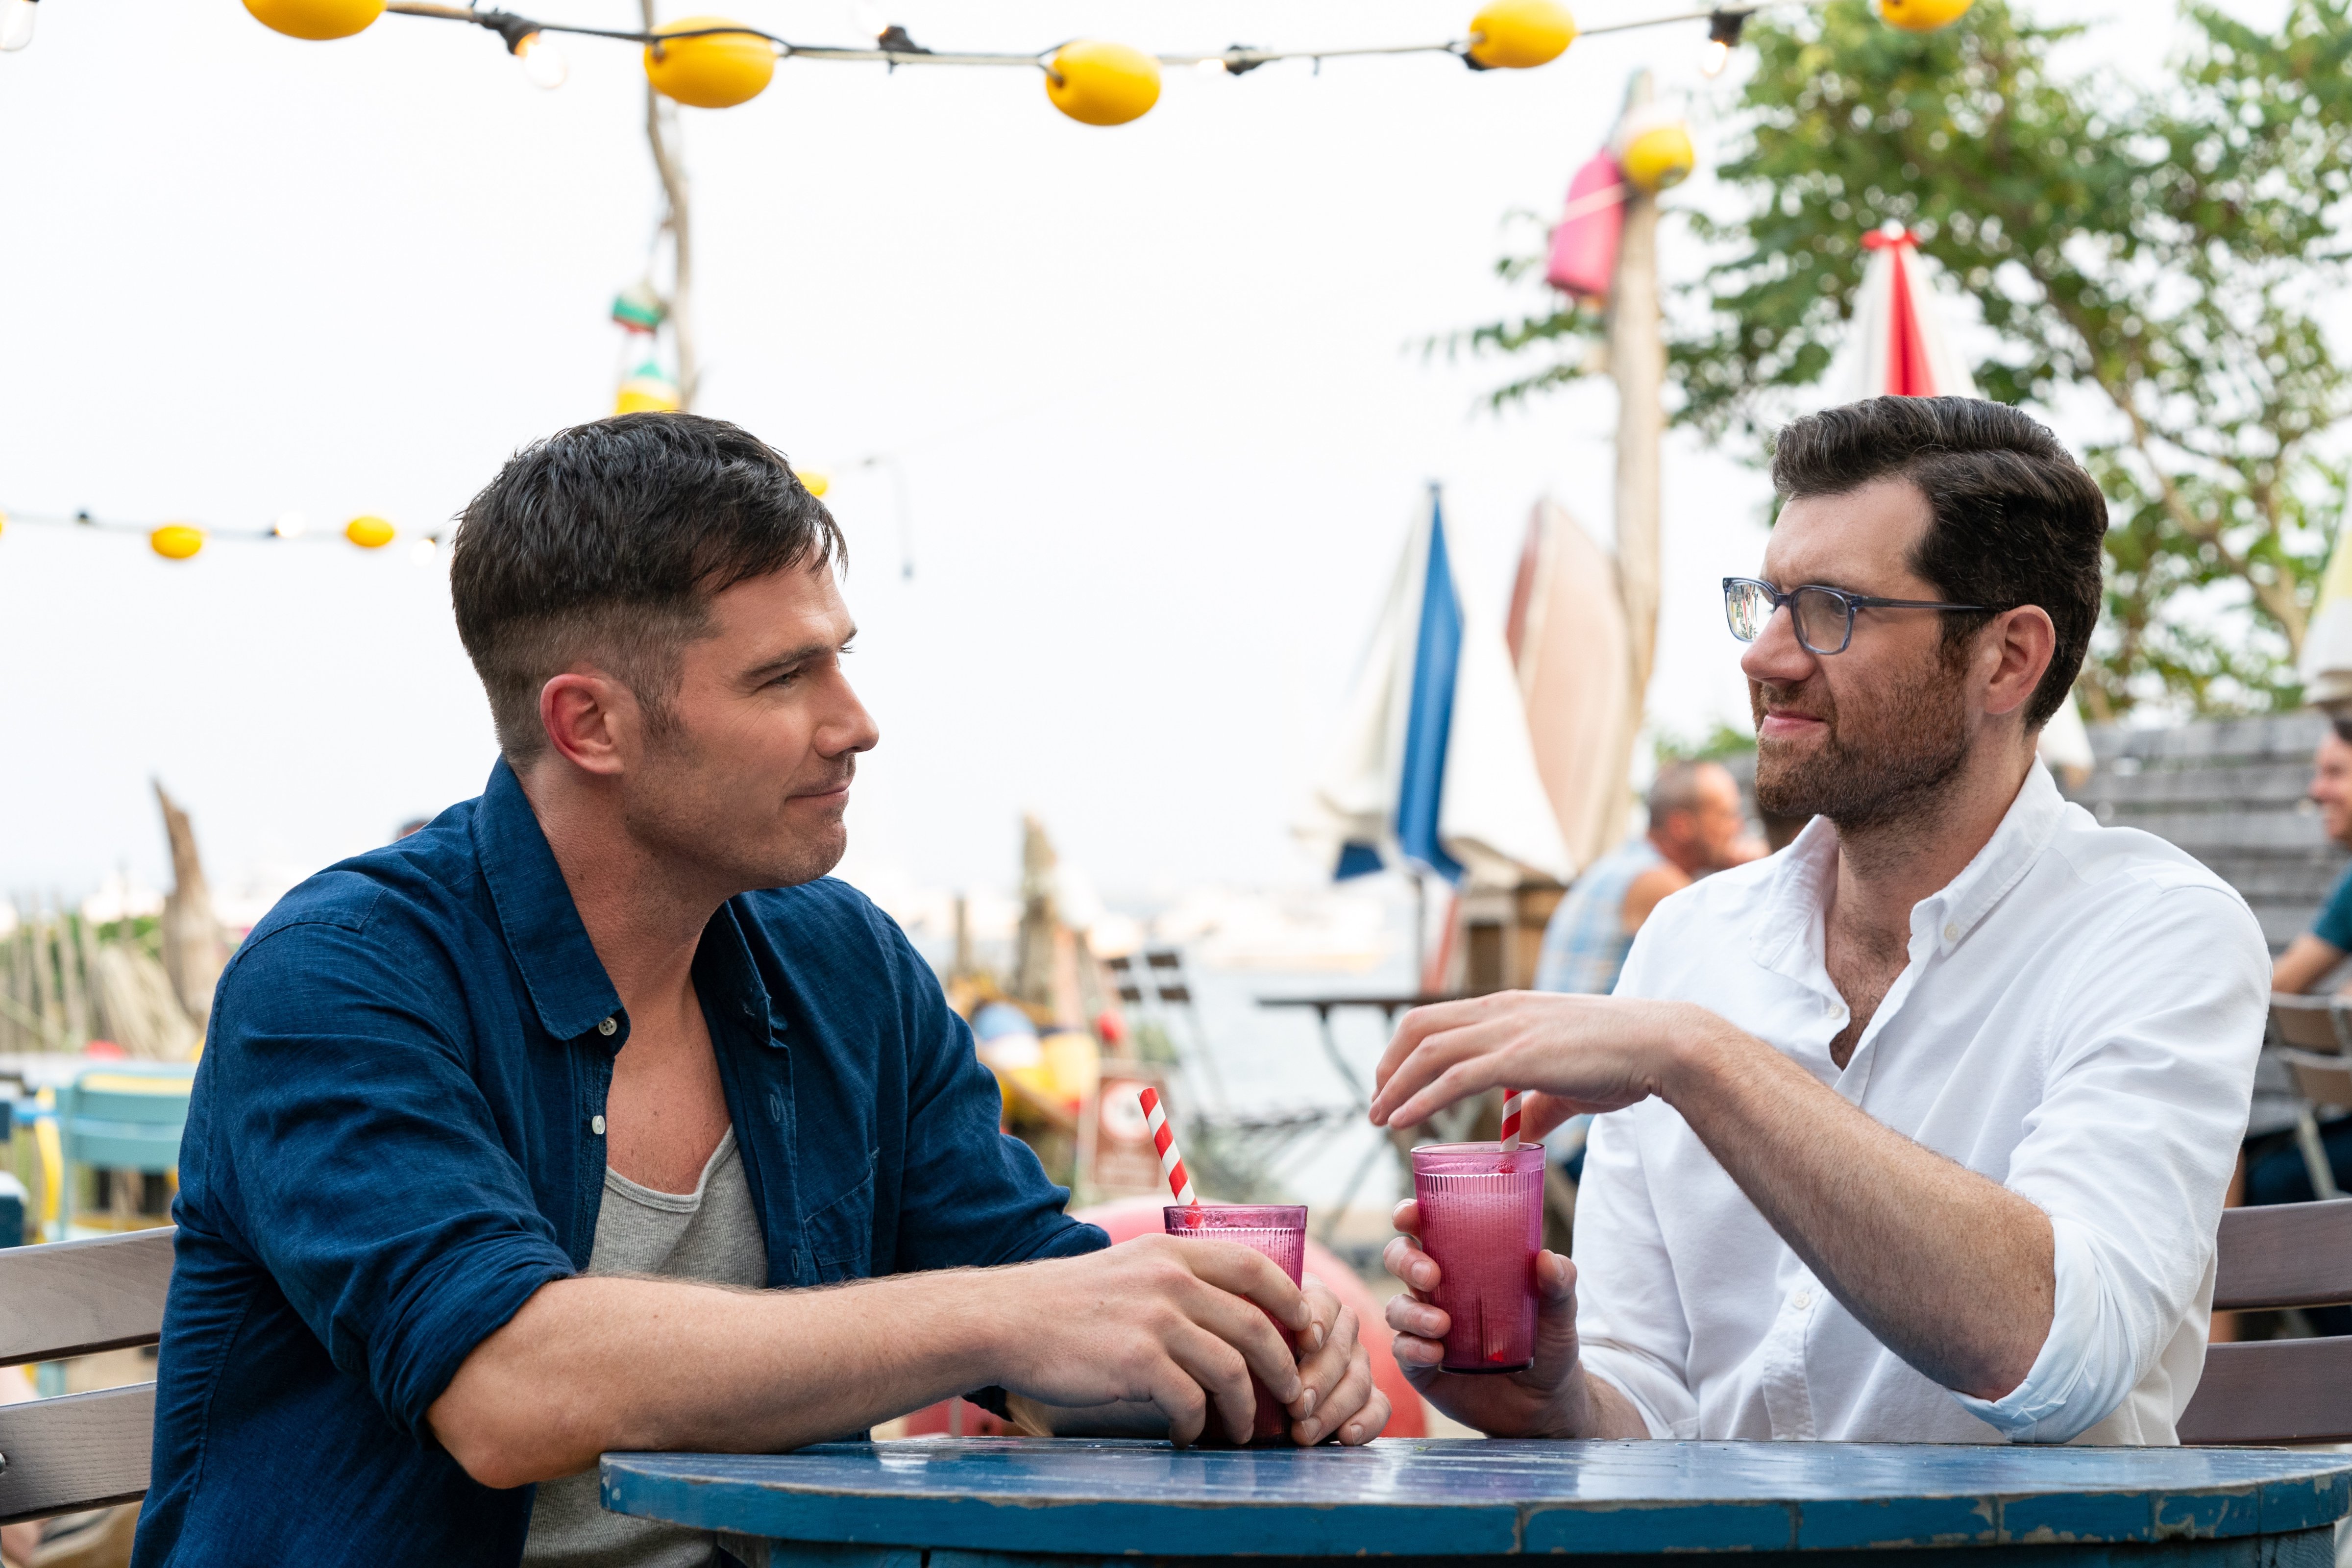 Aaron (Luke Macfarlane) and Bobby (Billy Eichner) in 'Bros' (Nicole Rivelli—Universal Pictures)